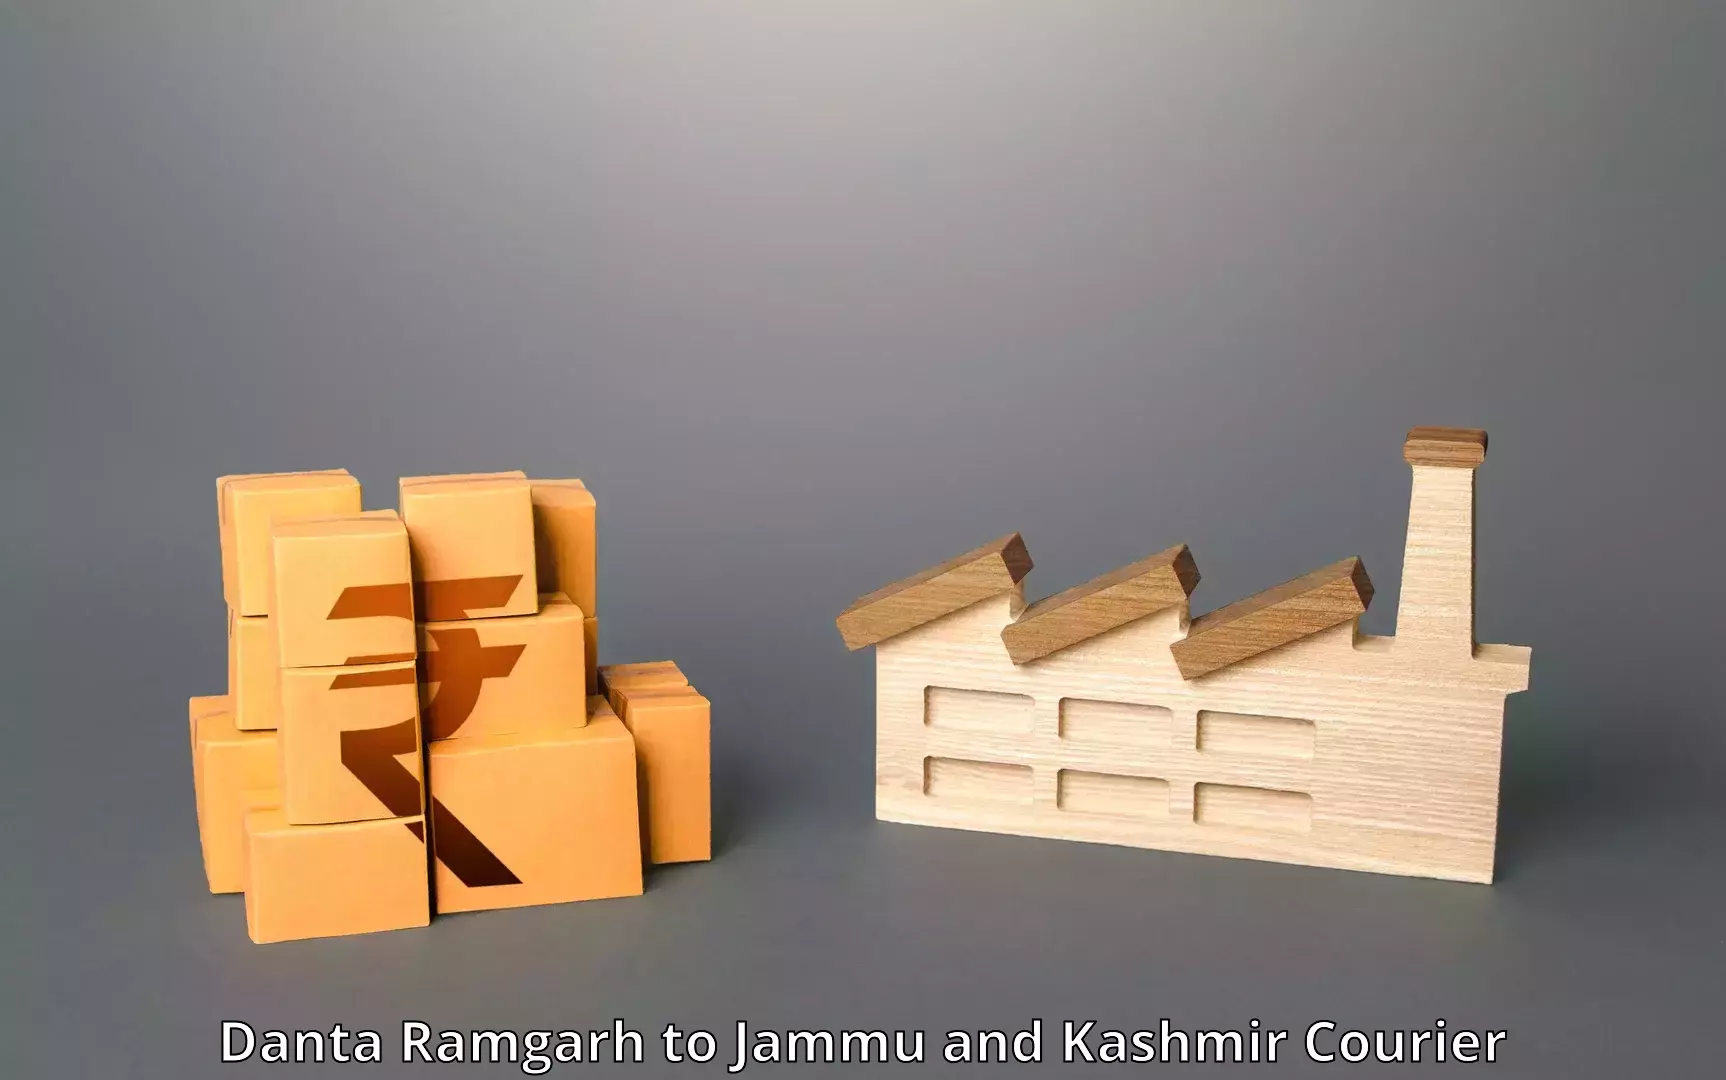 Flexible delivery schedules Danta Ramgarh to Jammu and Kashmir